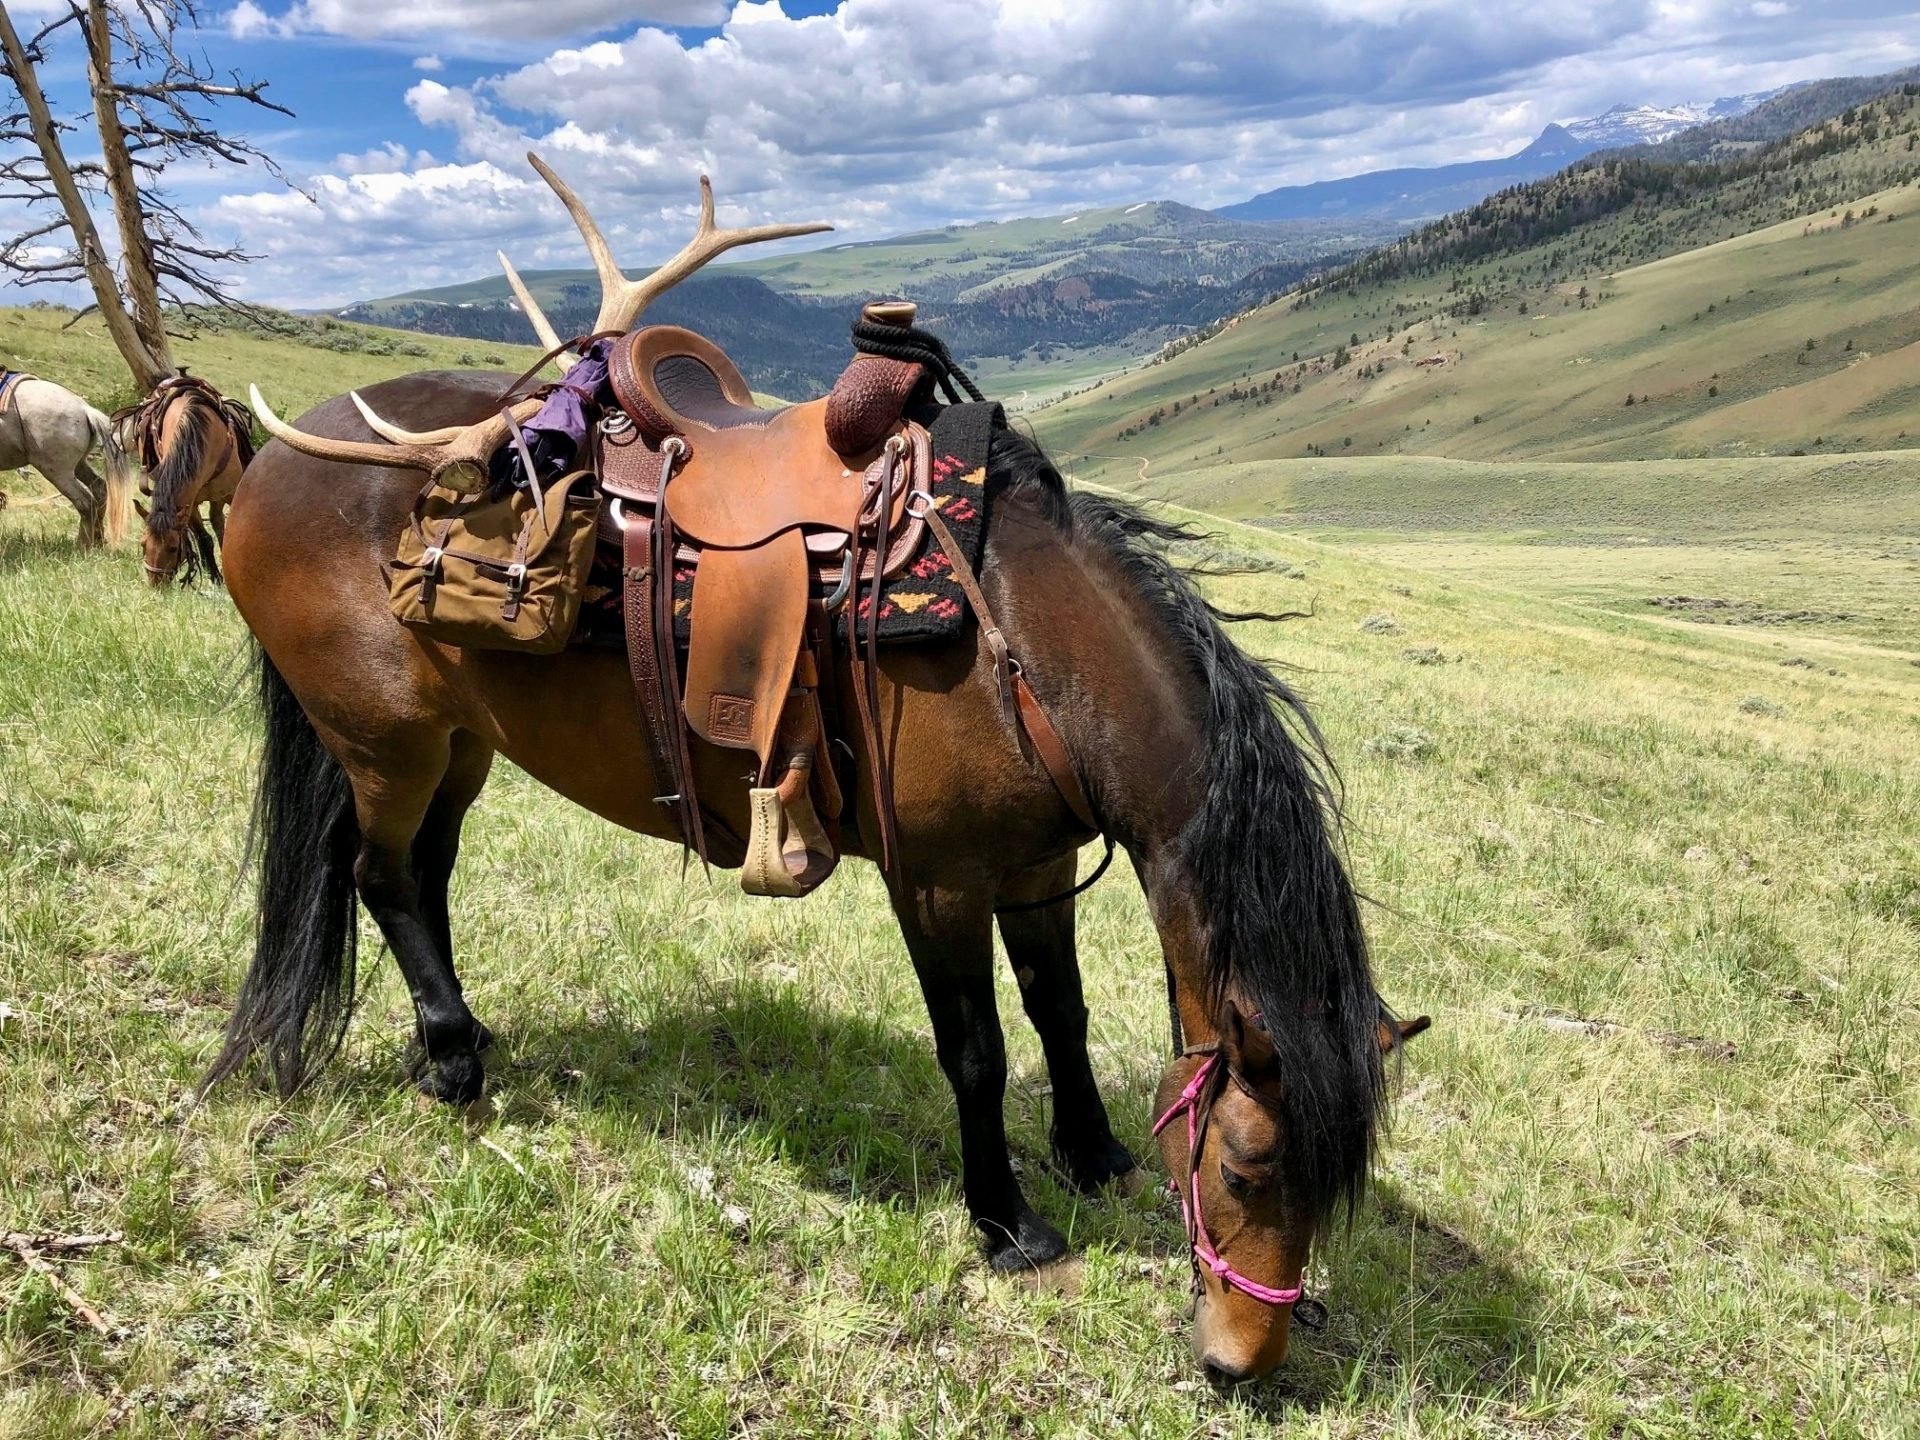 Grazing Horse with antler shed tied to saddle grazing in open landscape - Lazy L&B Guest Ranch Wyoming